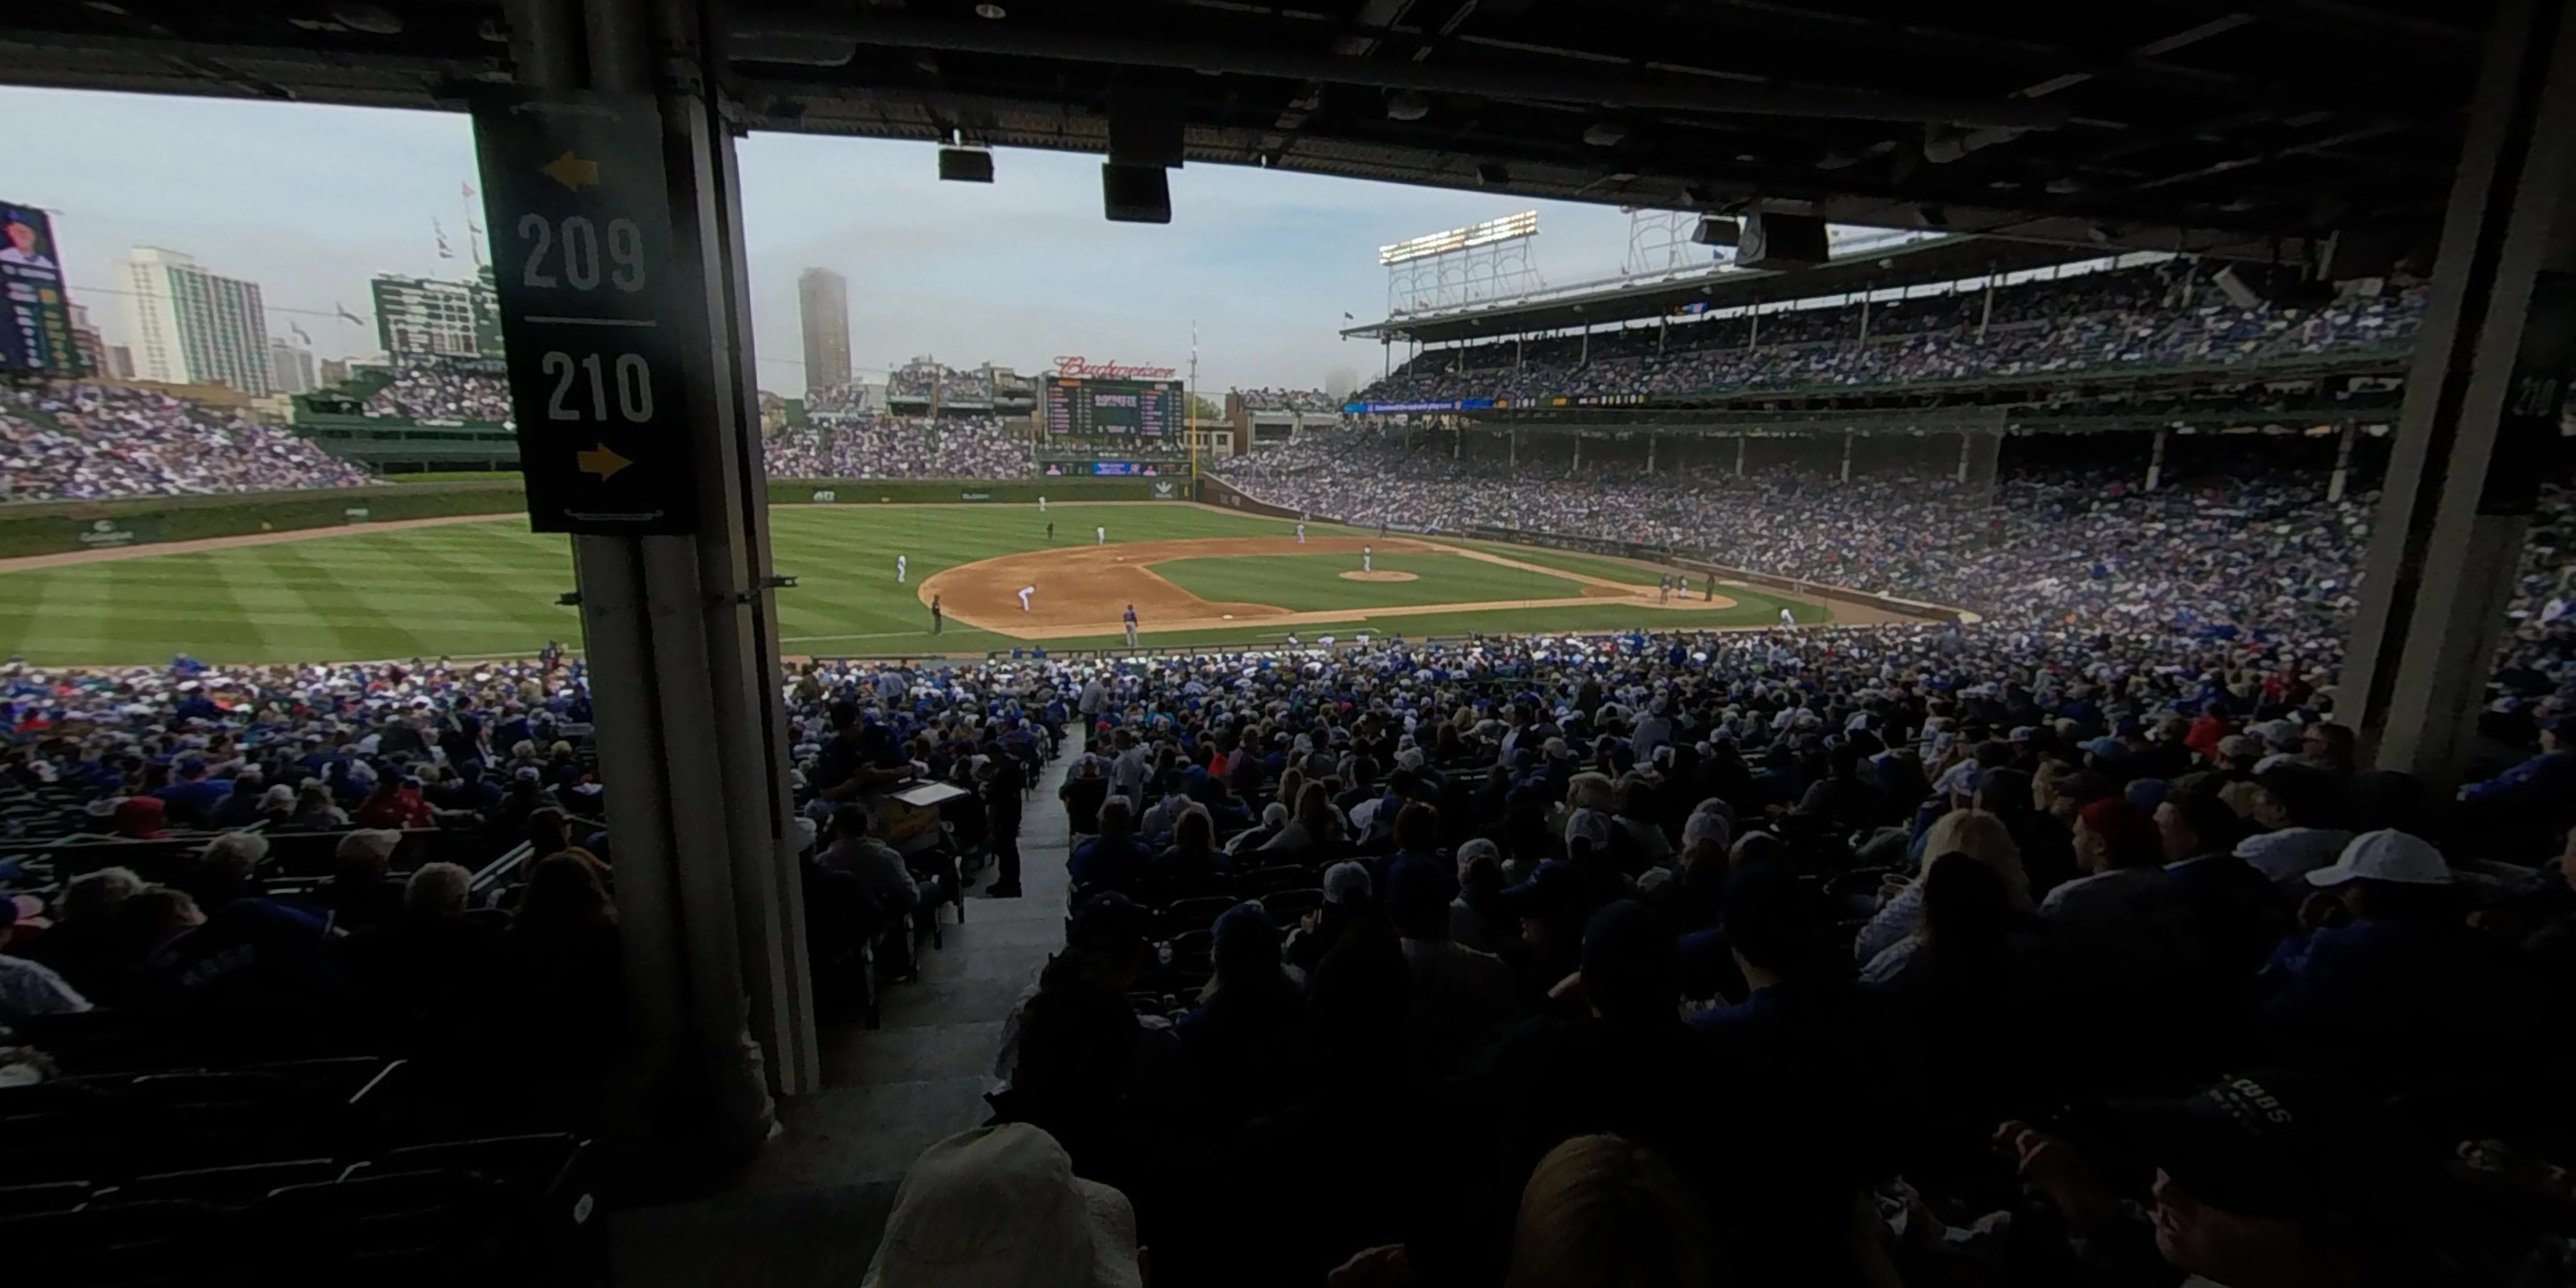 section 209 panoramic seat view  for baseball - wrigley field